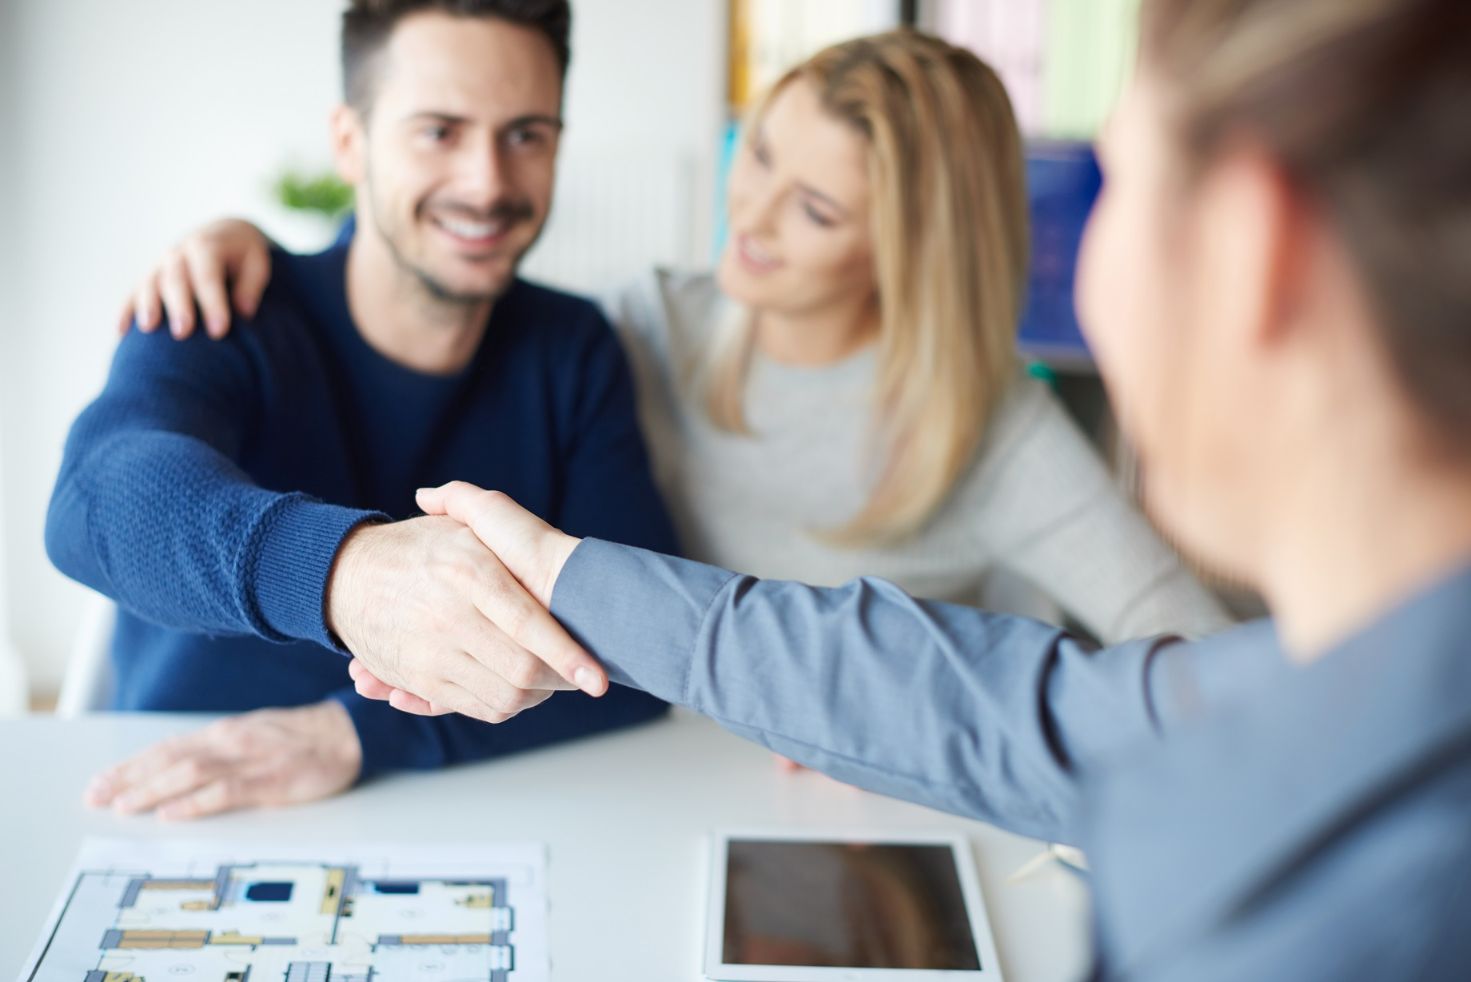 Get matched with a mortgage broker in your area for free. We'll find the one that best meets your needs, and you won't have to worry about negotiating the rates, fees, or paperwork.